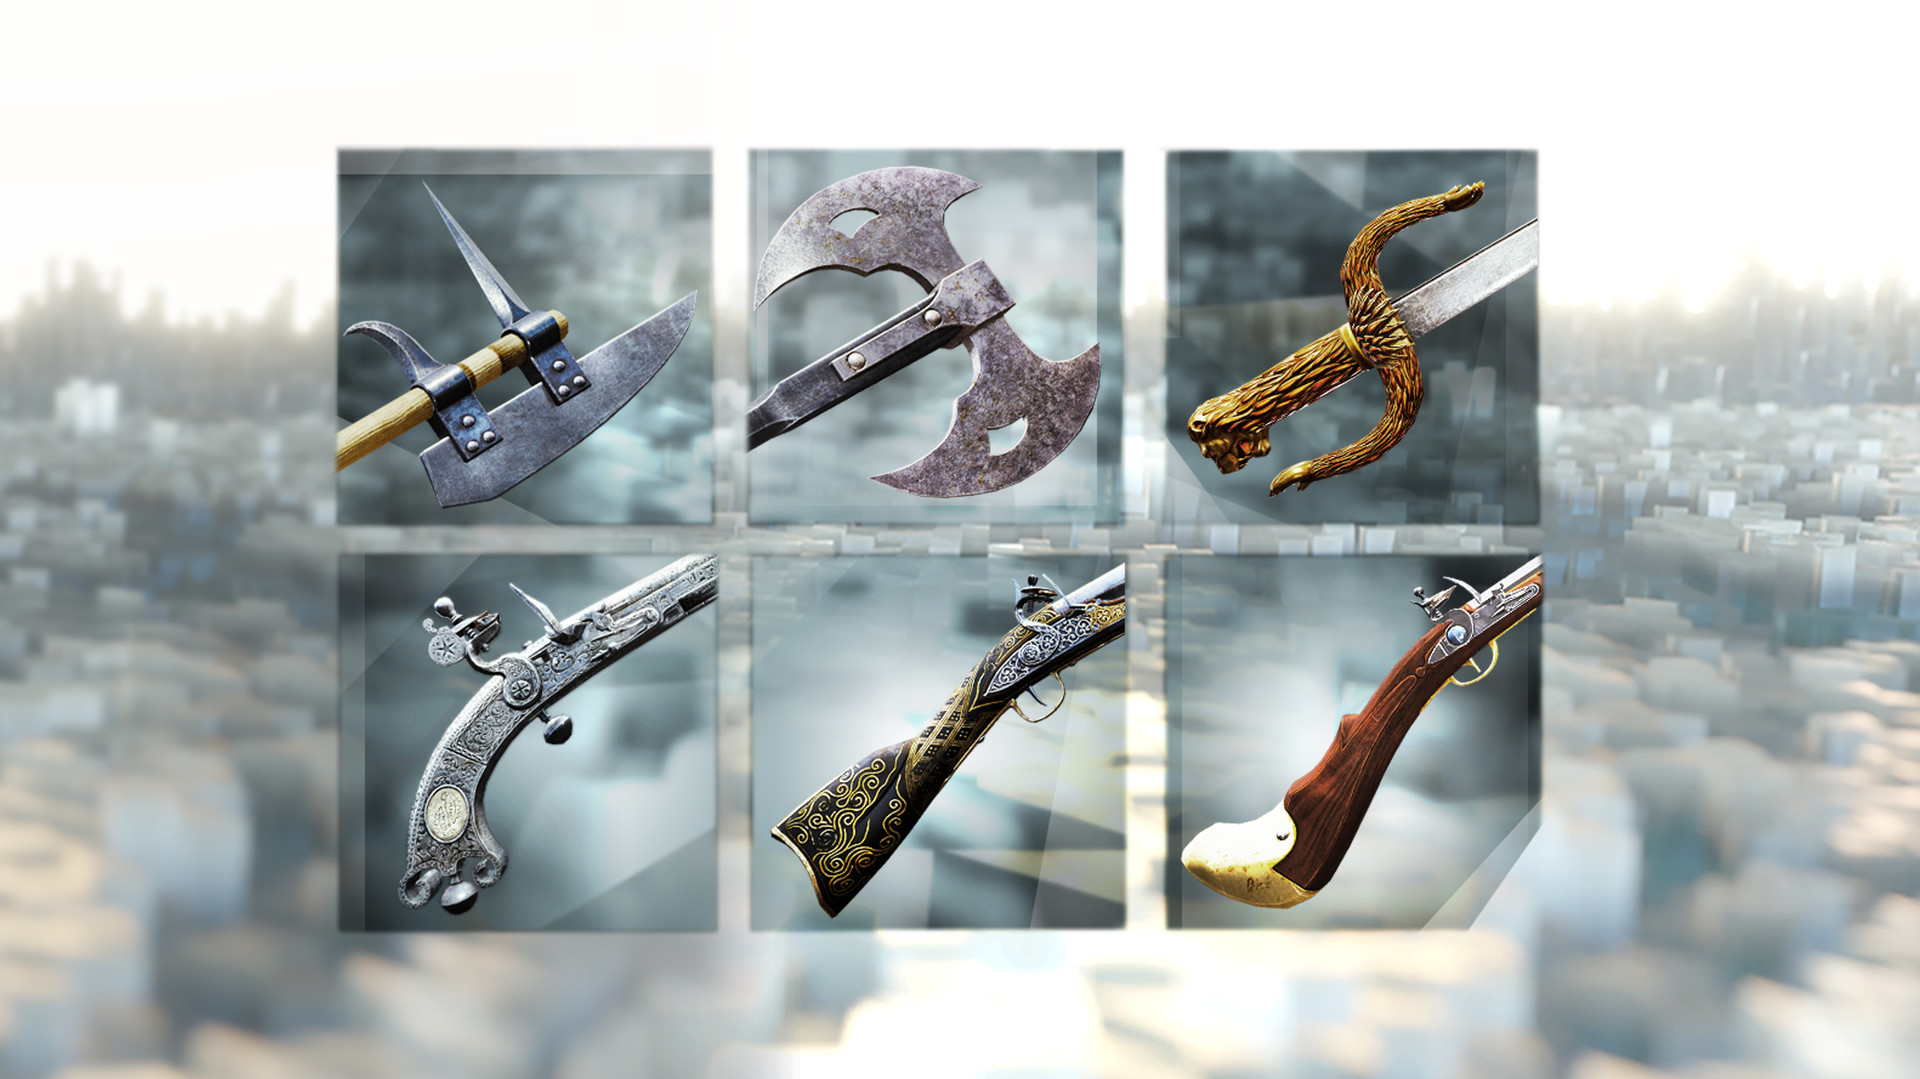 Assassin’s Creed Unity Revolutionary Armaments Pack Featured Screenshot #1